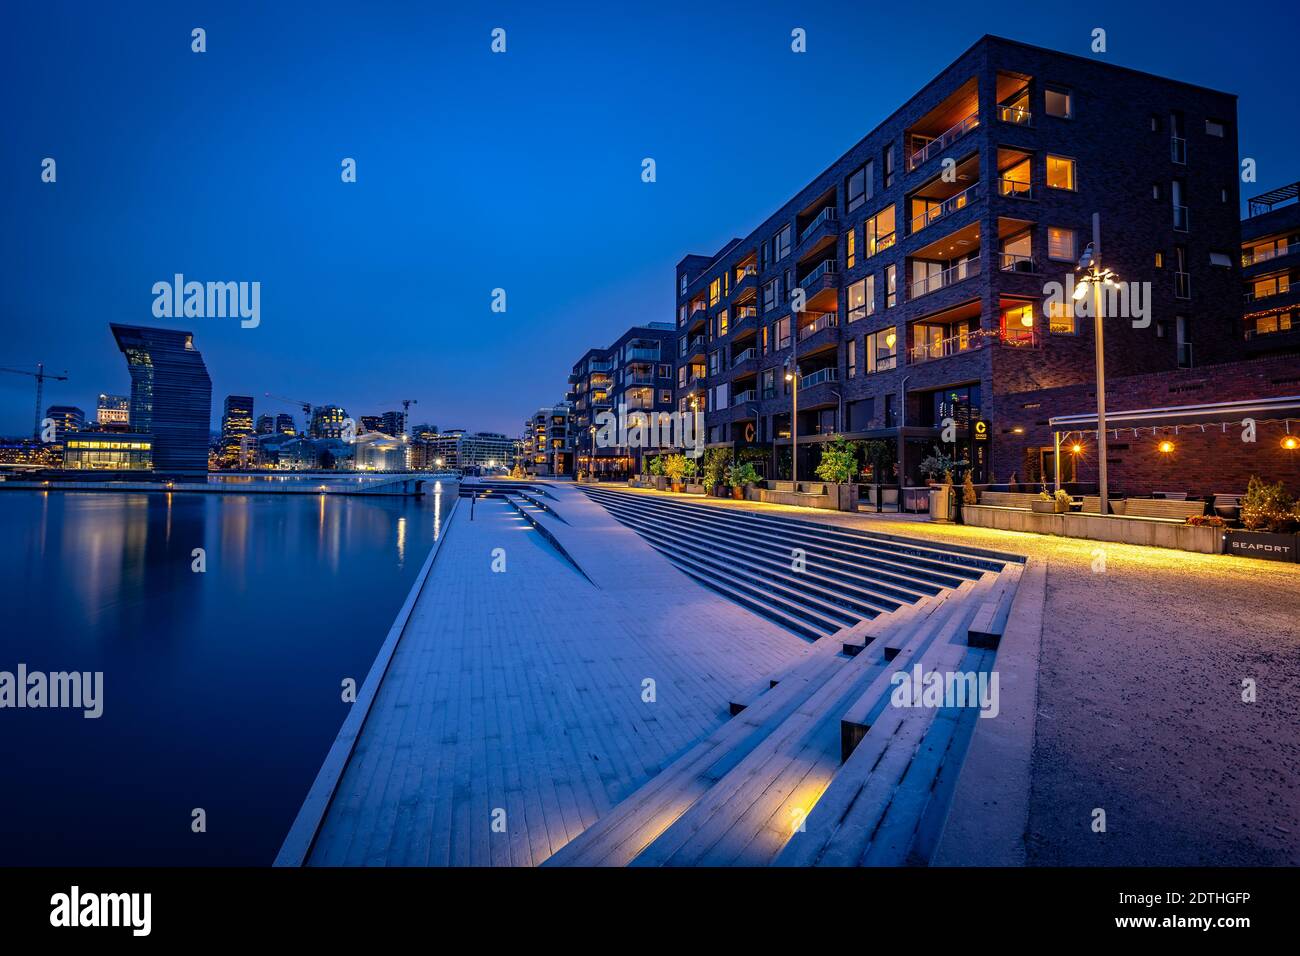 Oslo, Norway - Residential apartments and Lambda art museum building Stock Photo